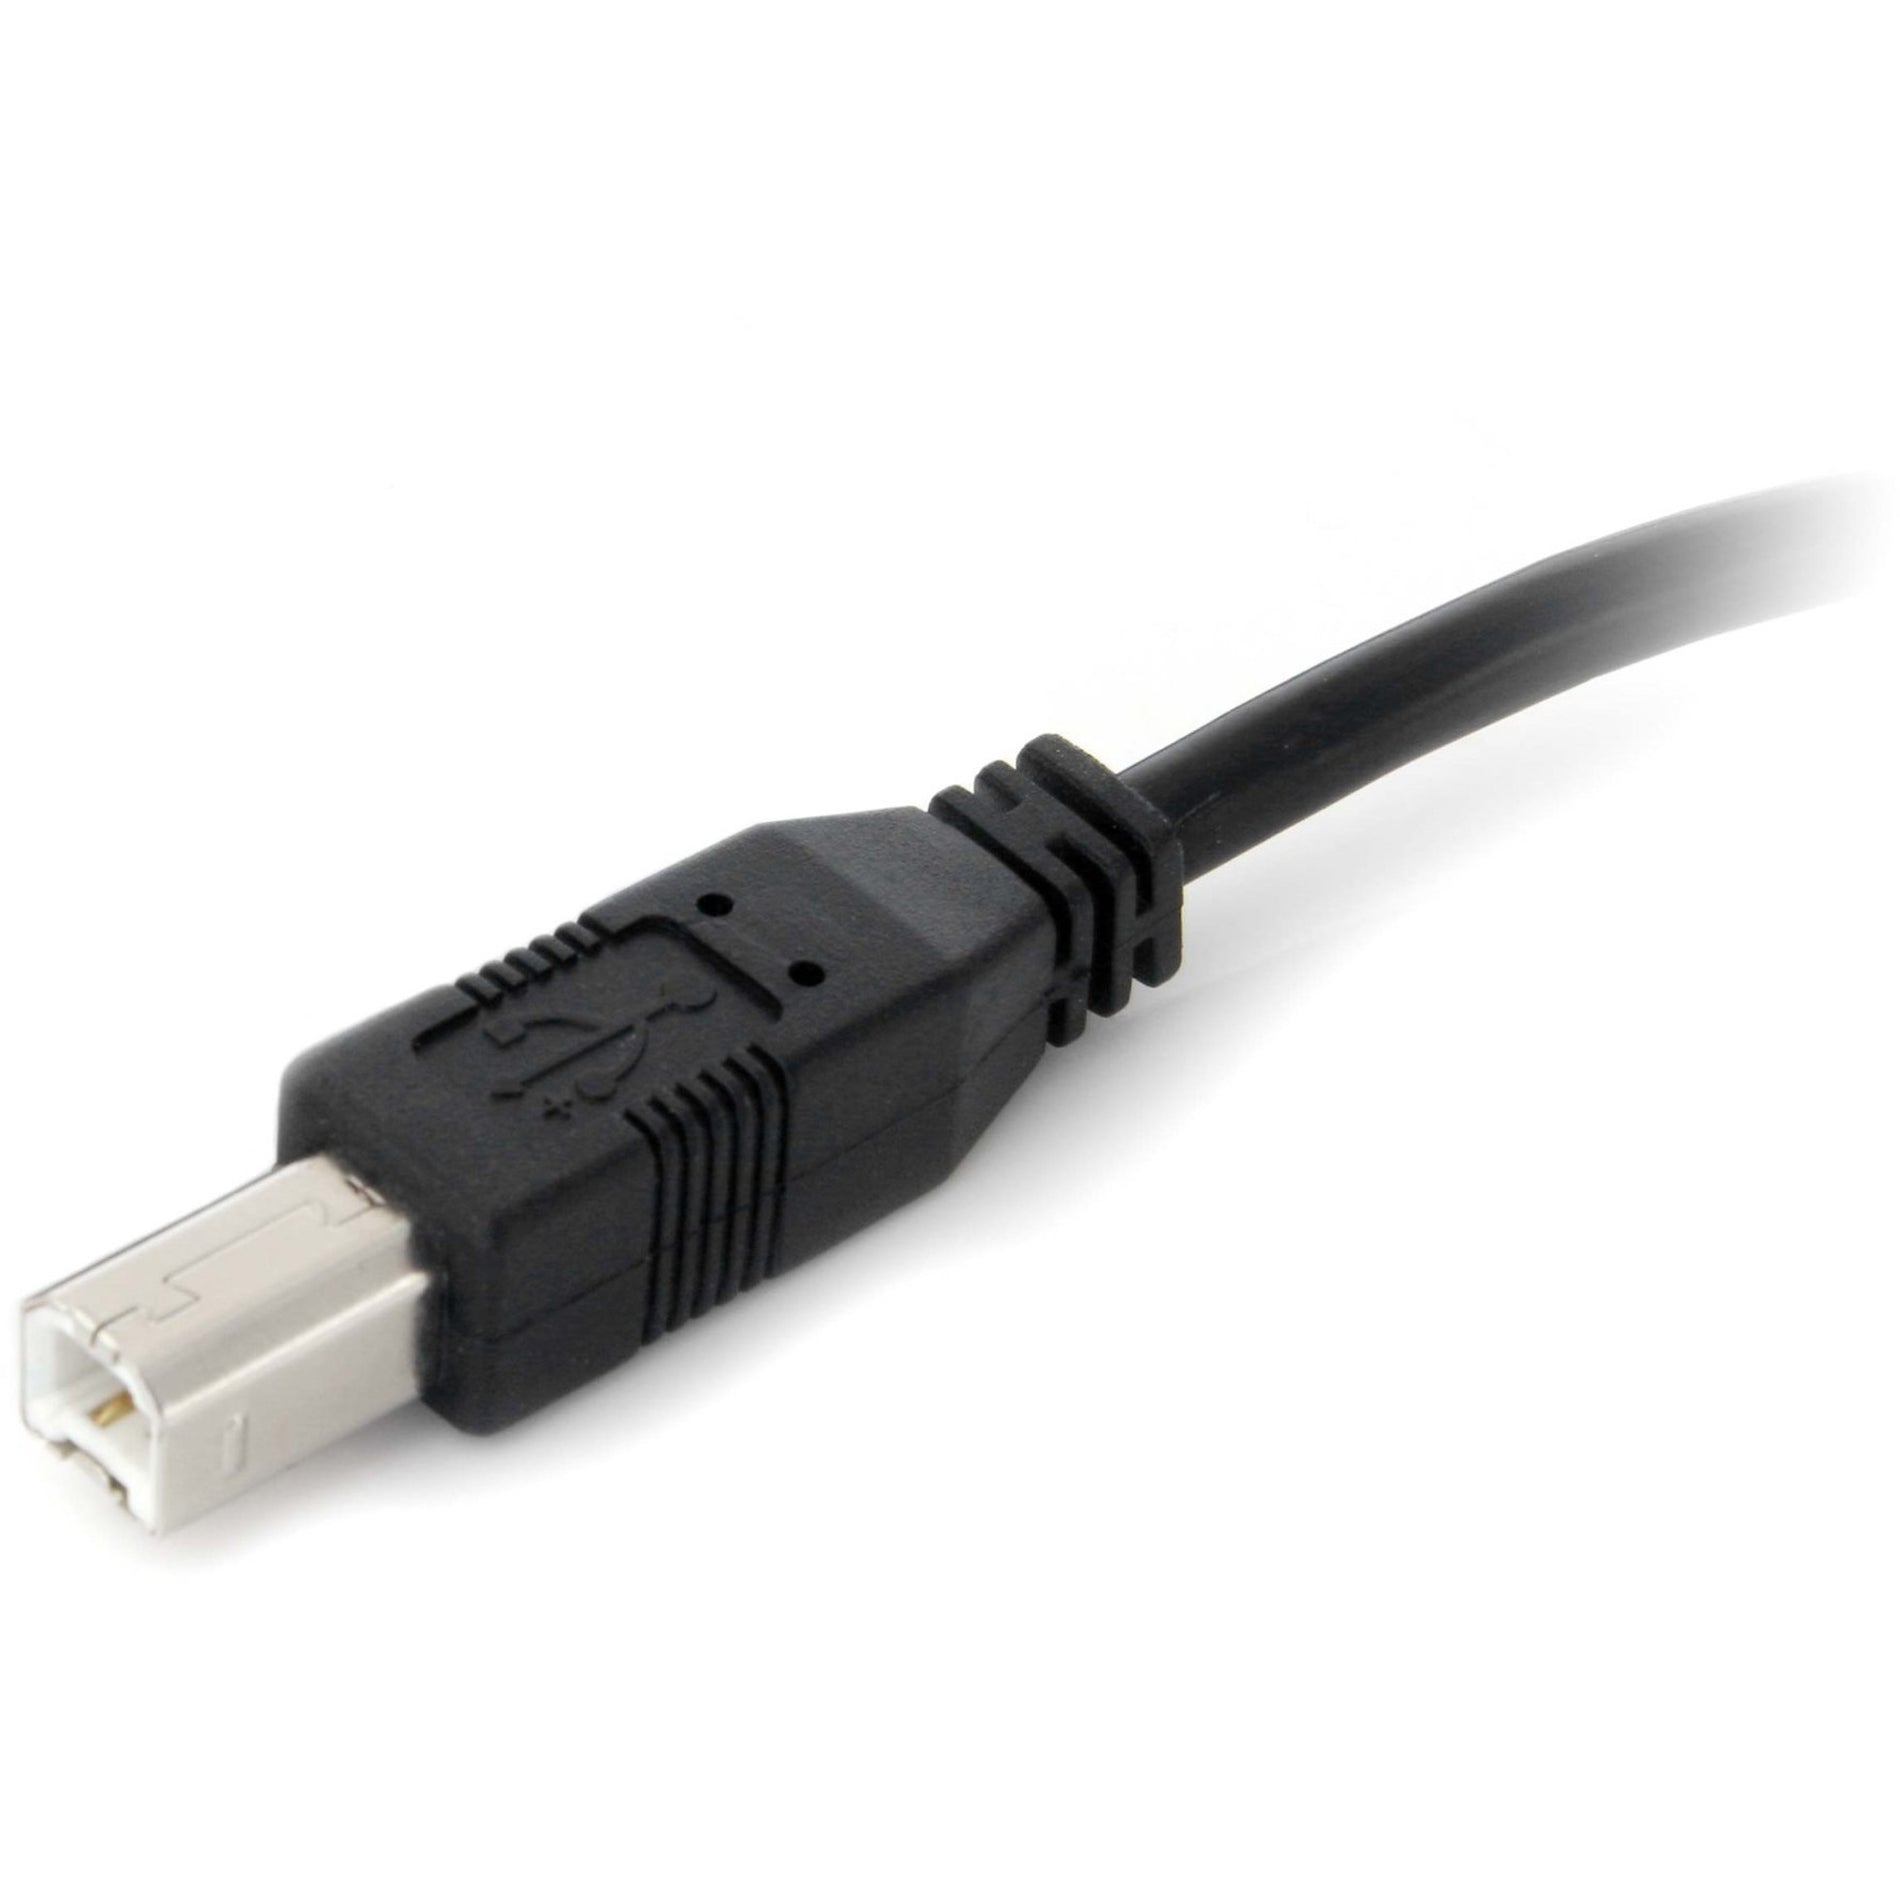 StarTech.com USB2HAB30AC 30 ft Active USB 2.0 A to B Cable - M/M, Extended Length, High Quality